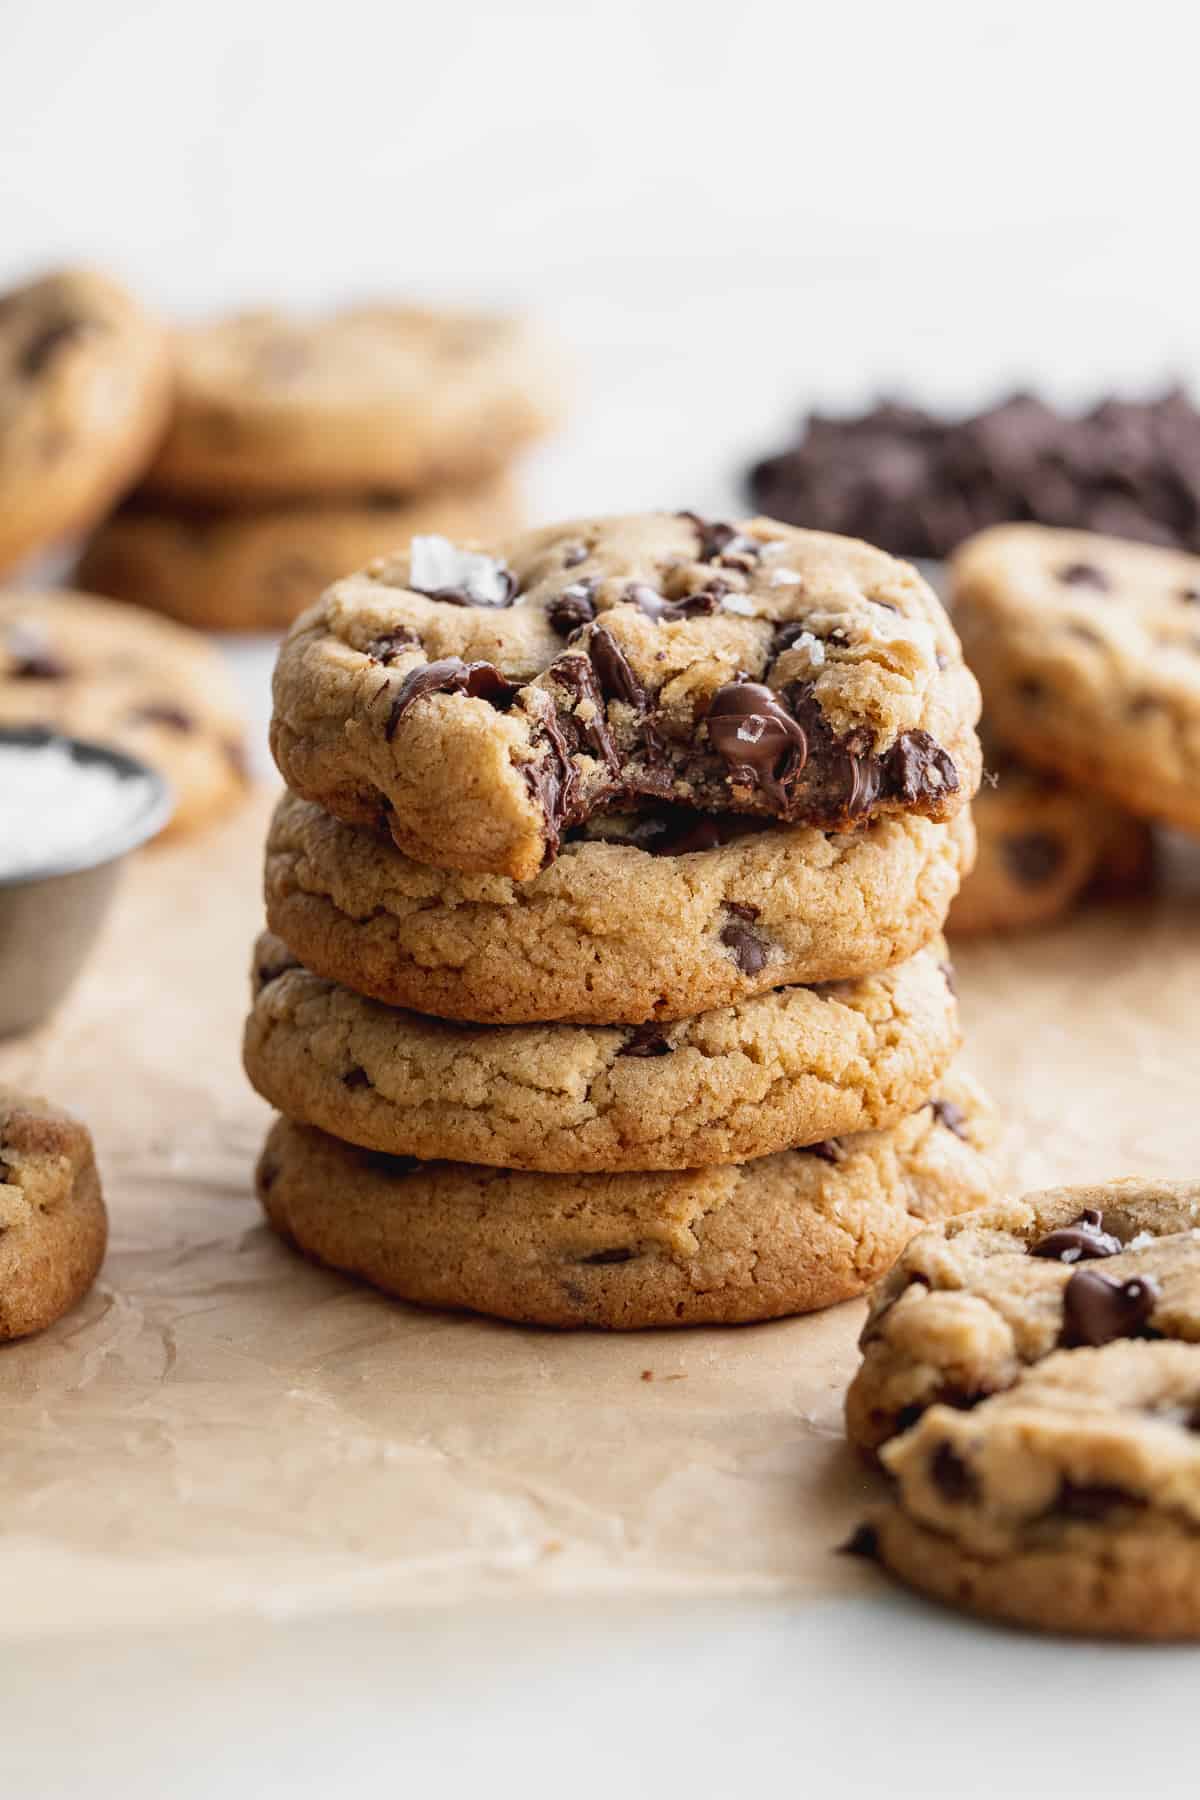 Stack of cookies with 1 missing a bite.